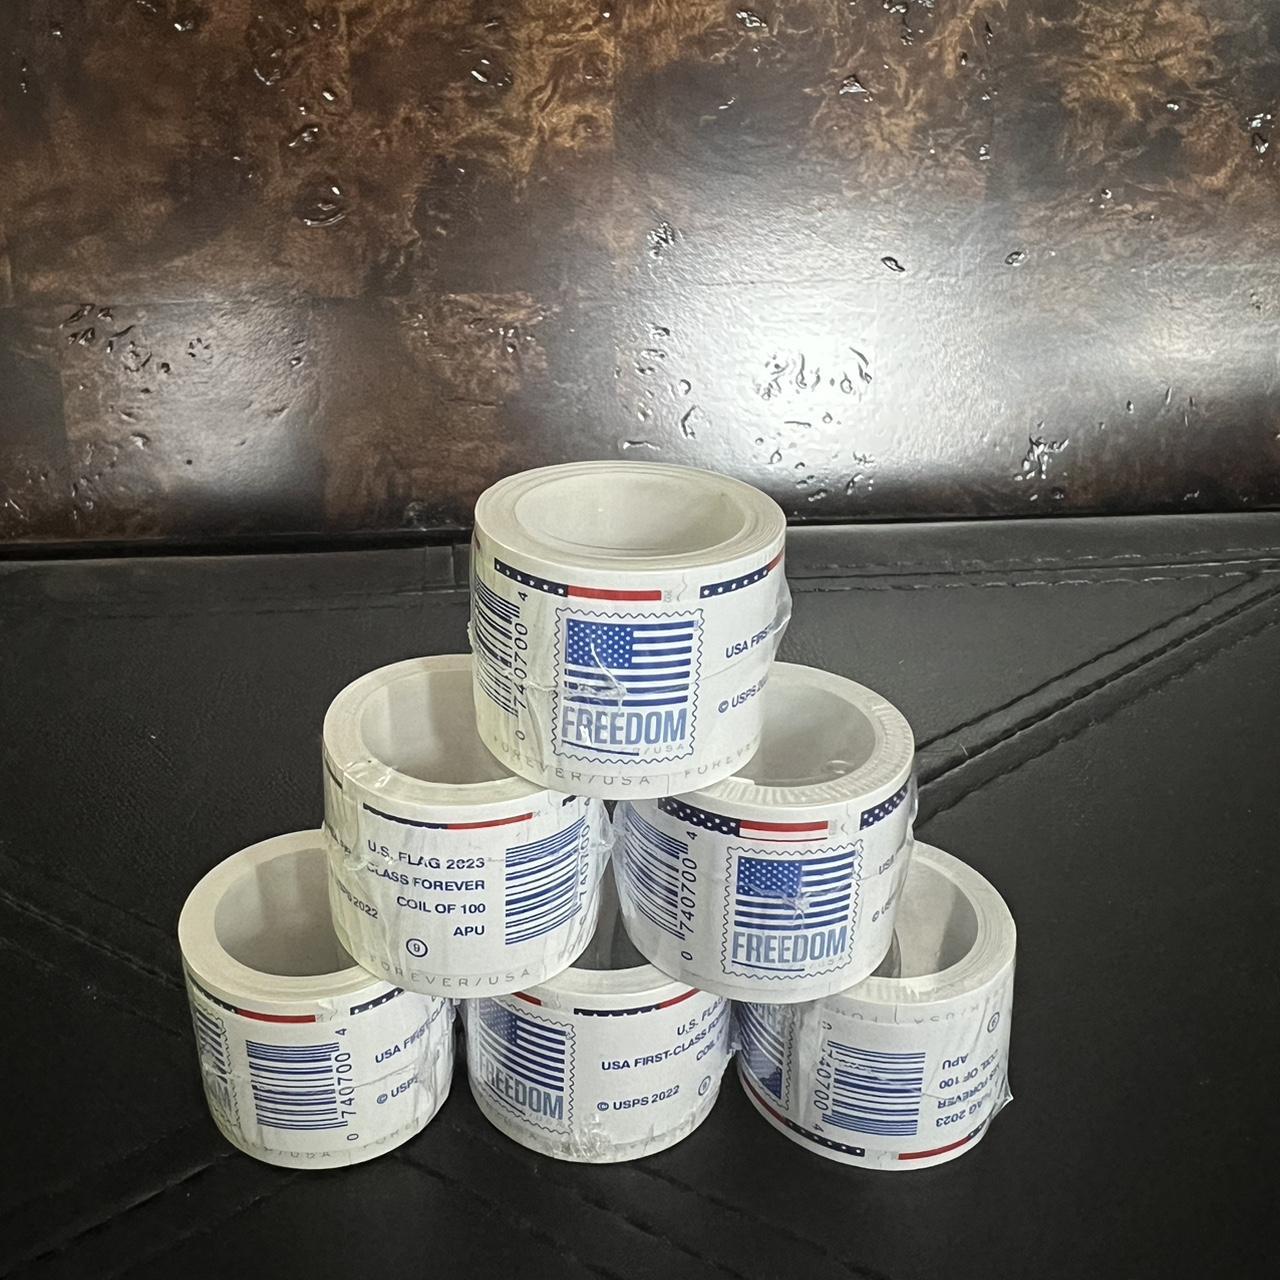 2023 Forever 6 Rolls of 600 Stamps This is 6 rolls - Depop